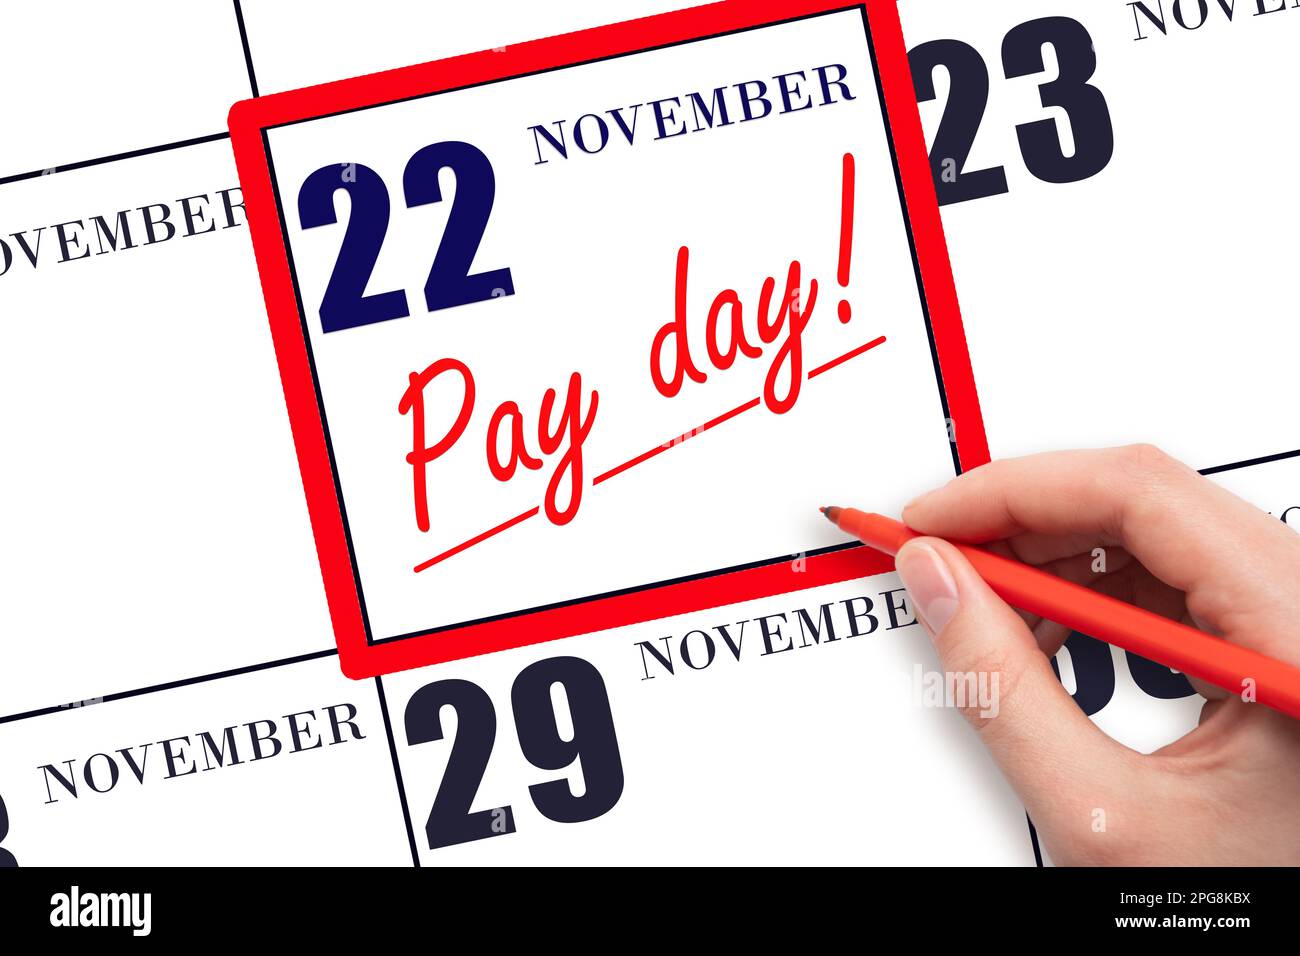 22nd day of November. Hand writing text PAY DATE on calendar date November 22 and underline it. Payment due date. Reminder concept of payment. Autumn Stock Photo